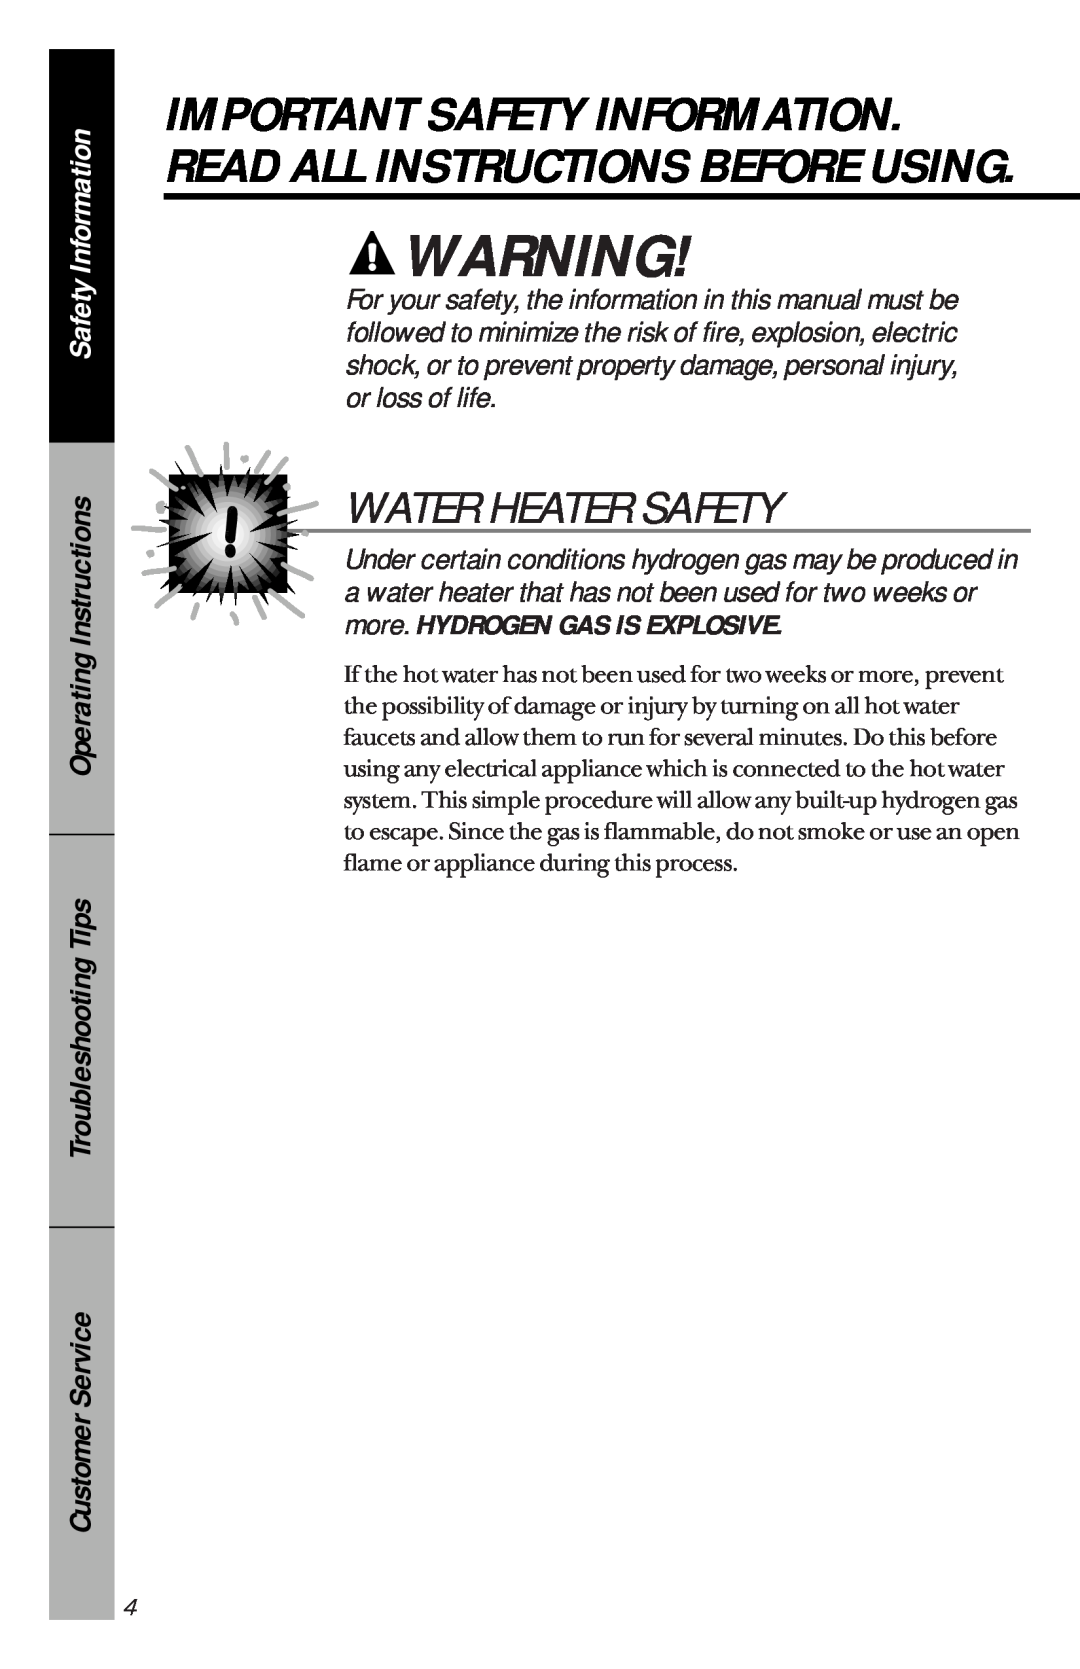 Hotpoint HDA2220 Water Heater Safety, Safety Information, Operating Instructions Troubleshooting Tips, Customer Service 